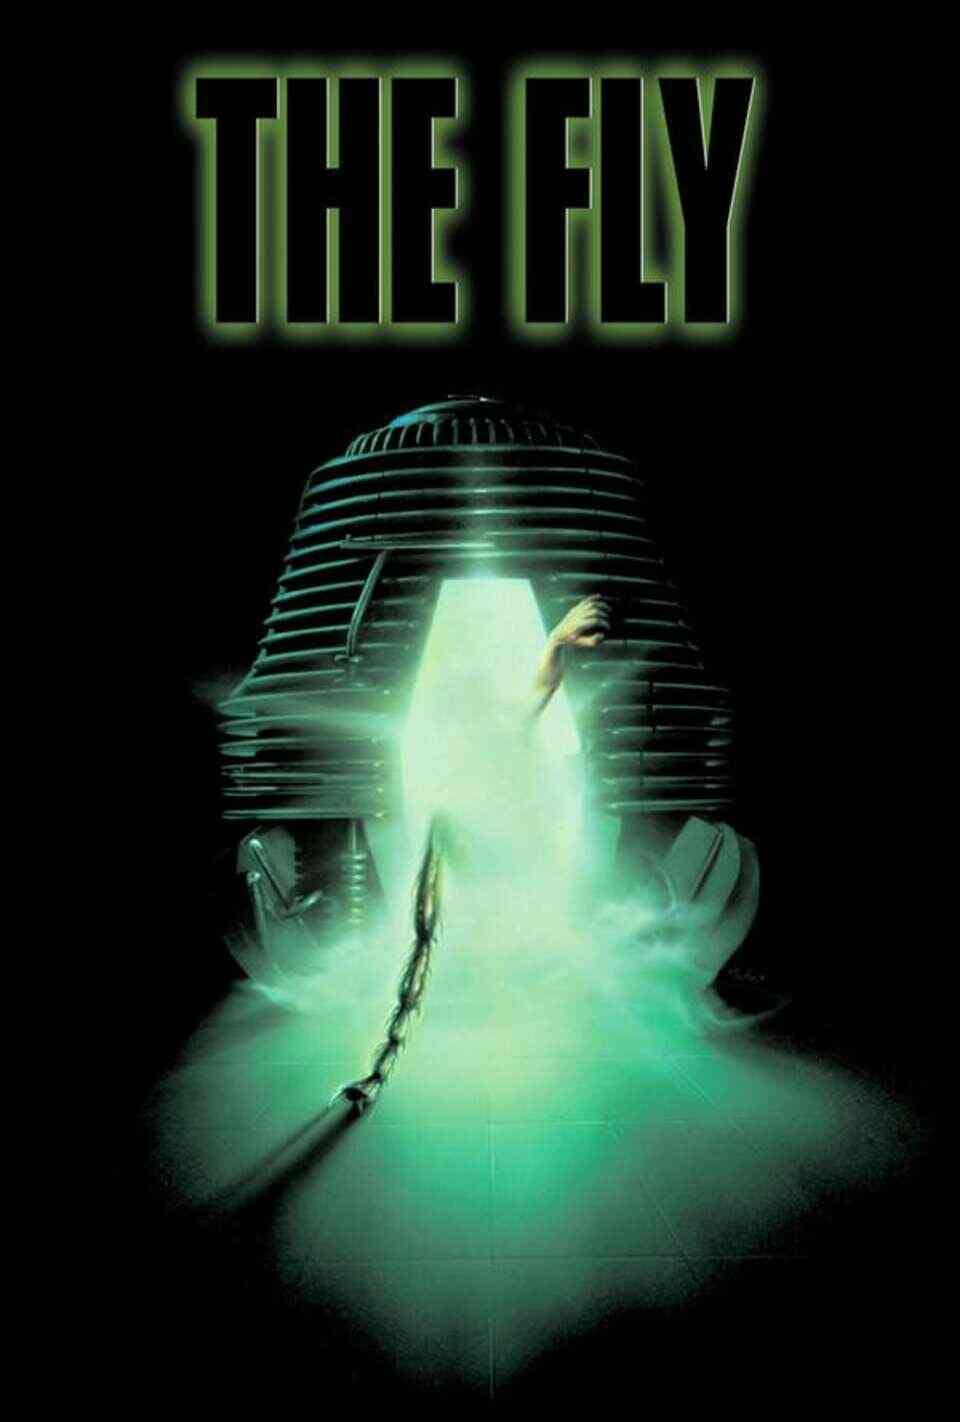 Read The Fly screenplay.